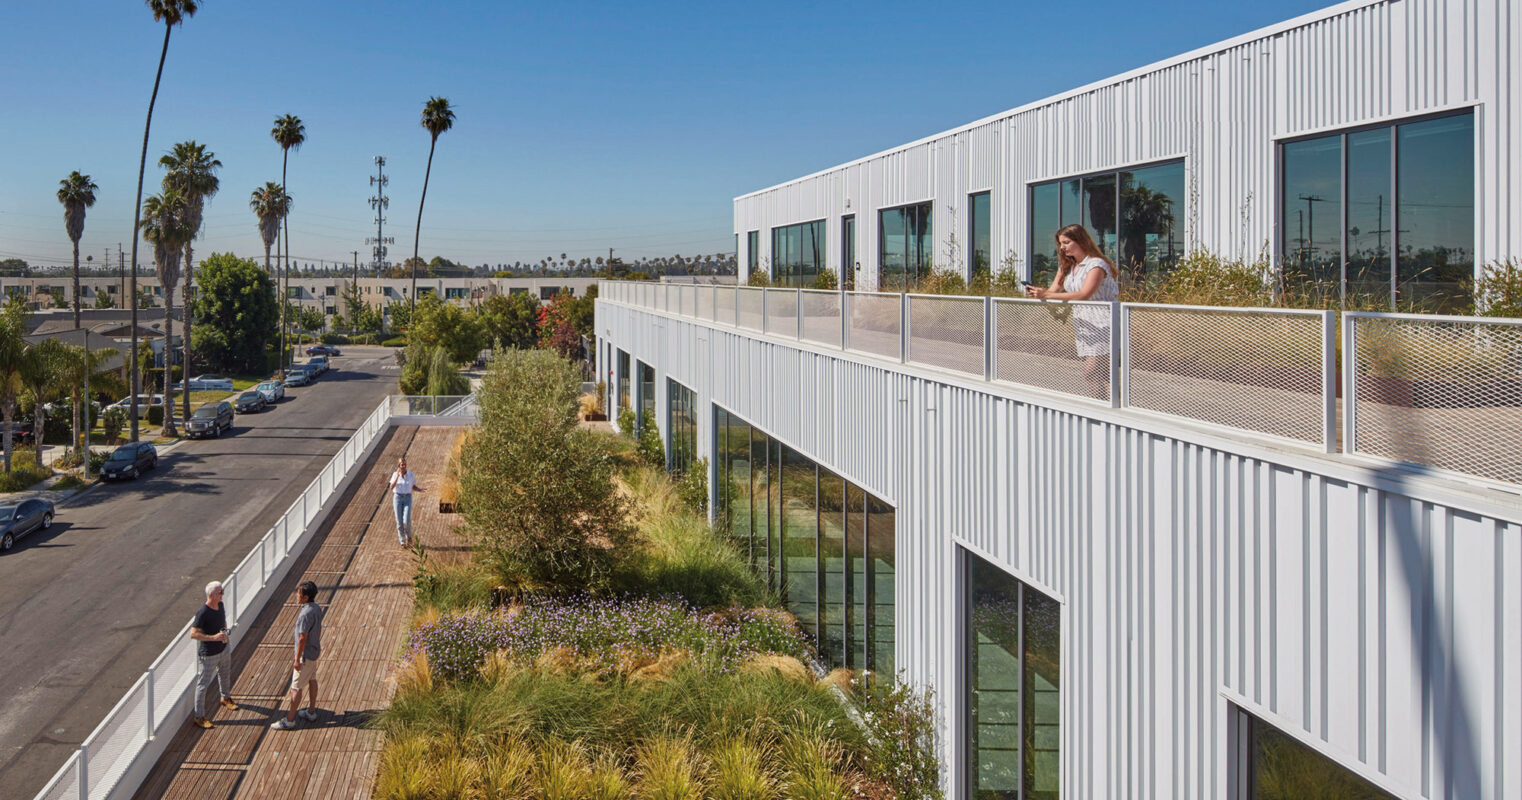 Modern office building integrating green spaces: an employee enjoys a lush rooftop garden walkway, with palm trees and blue skies in the background, emphasizing eco-friendly design and work-life balance.